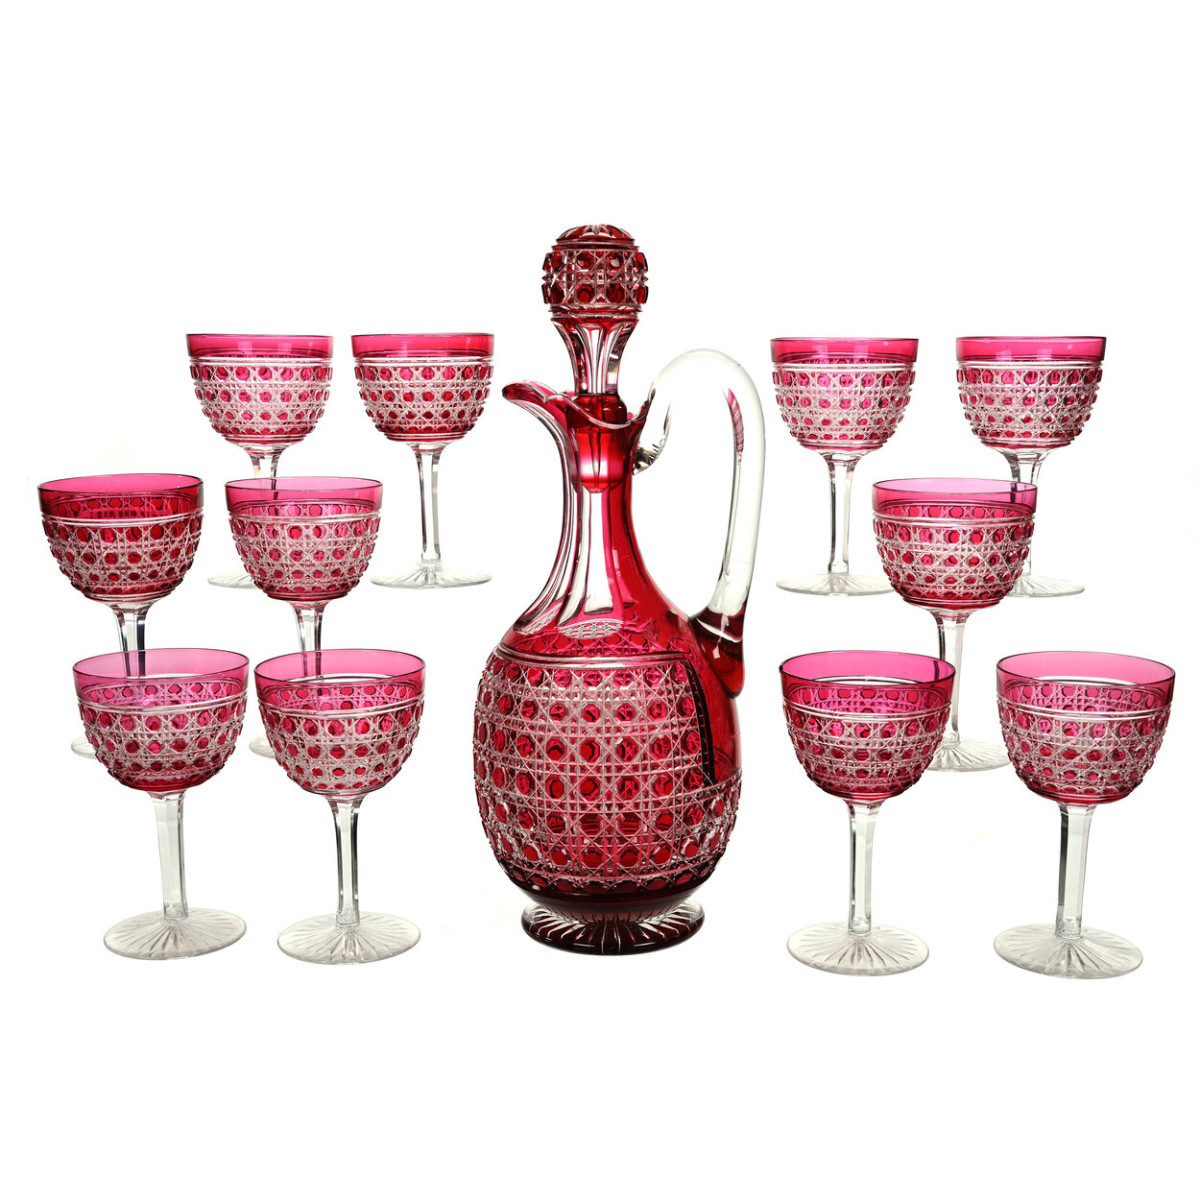 American Brilliant Period Cut Glass decanter set, with red cut to clear in the Cane pattern and with a pattern cut stopper. Estimate: $1,500 to $3,500.